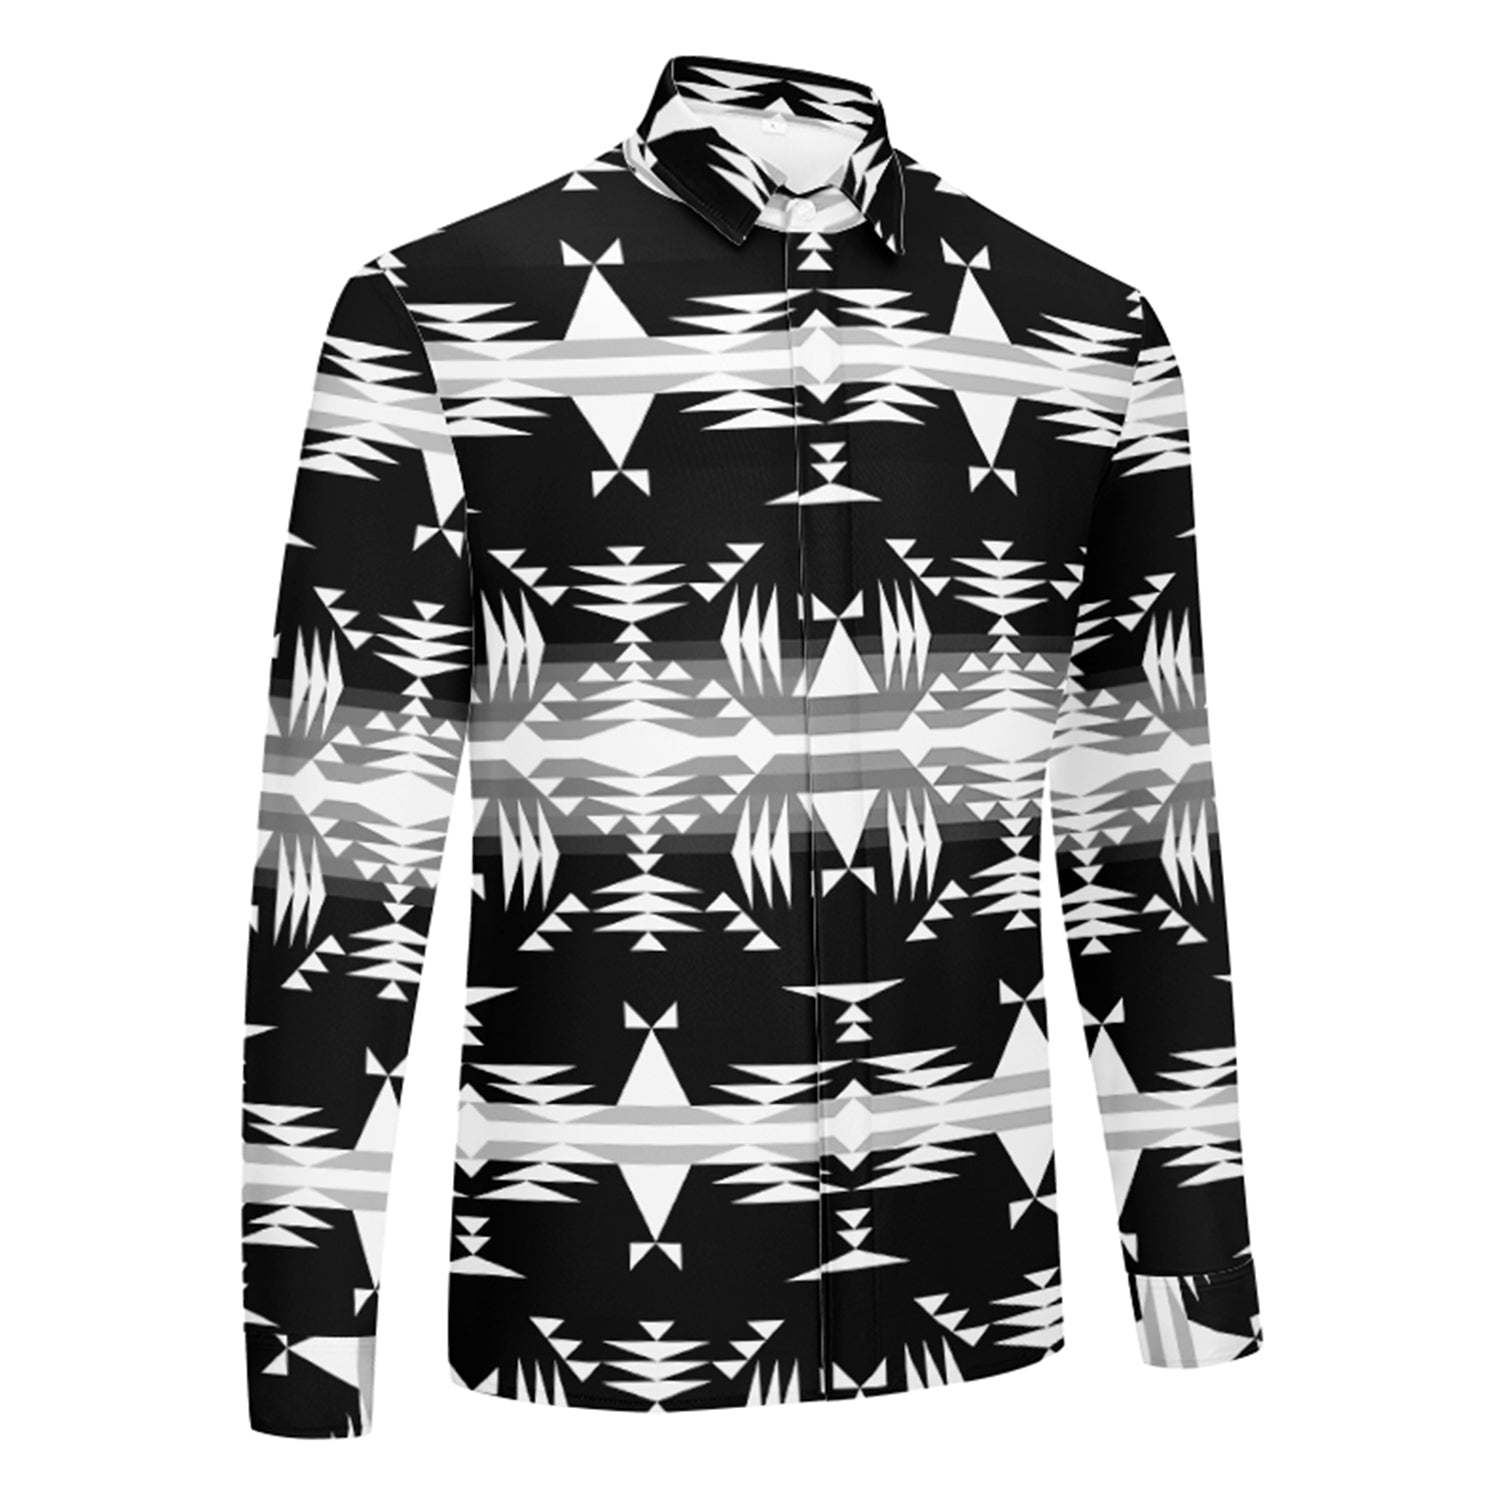 Between the Mountains Black and White Men's Long Sleeve Dress Shirt